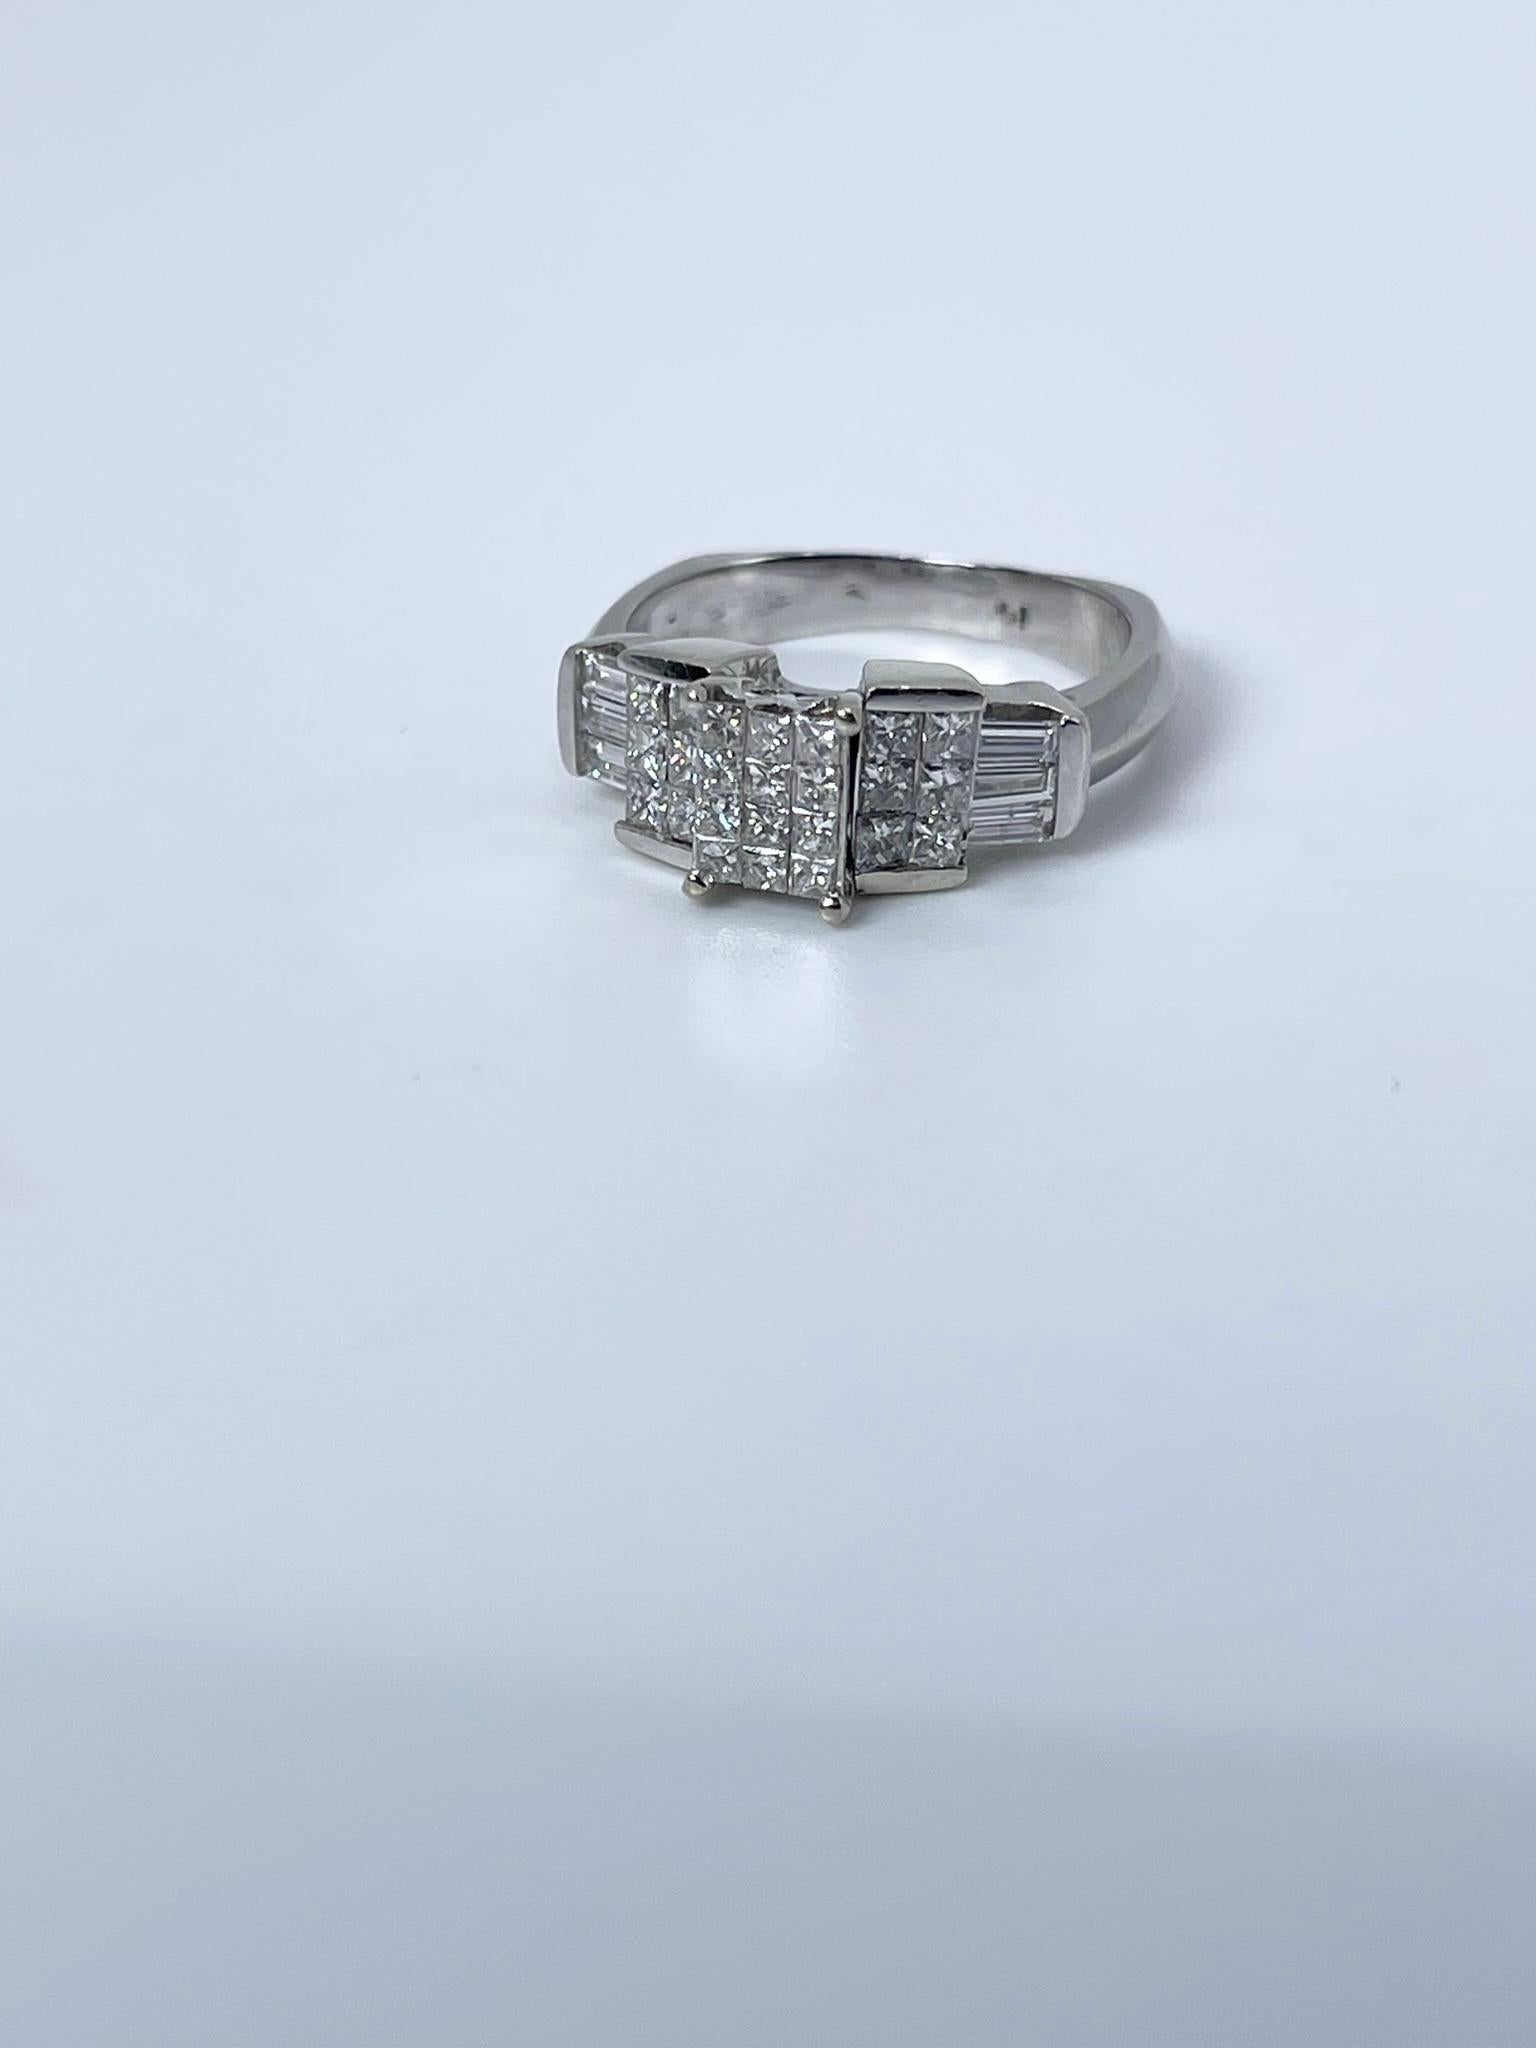 Princess cut diamond ring engagement ring style 14KT white gold.
ITEM#: KMP 100-00022
GRAM WEIGHT: 5.91gr
METAL: 14KT

NATURAL DIAMOND(S)
Cut: Round Brilliant, Square Brilliant
Color: G
Clarity: SI 
Carat: 0.55ct
Size: 8( can be re-sized)


WHAT YOU